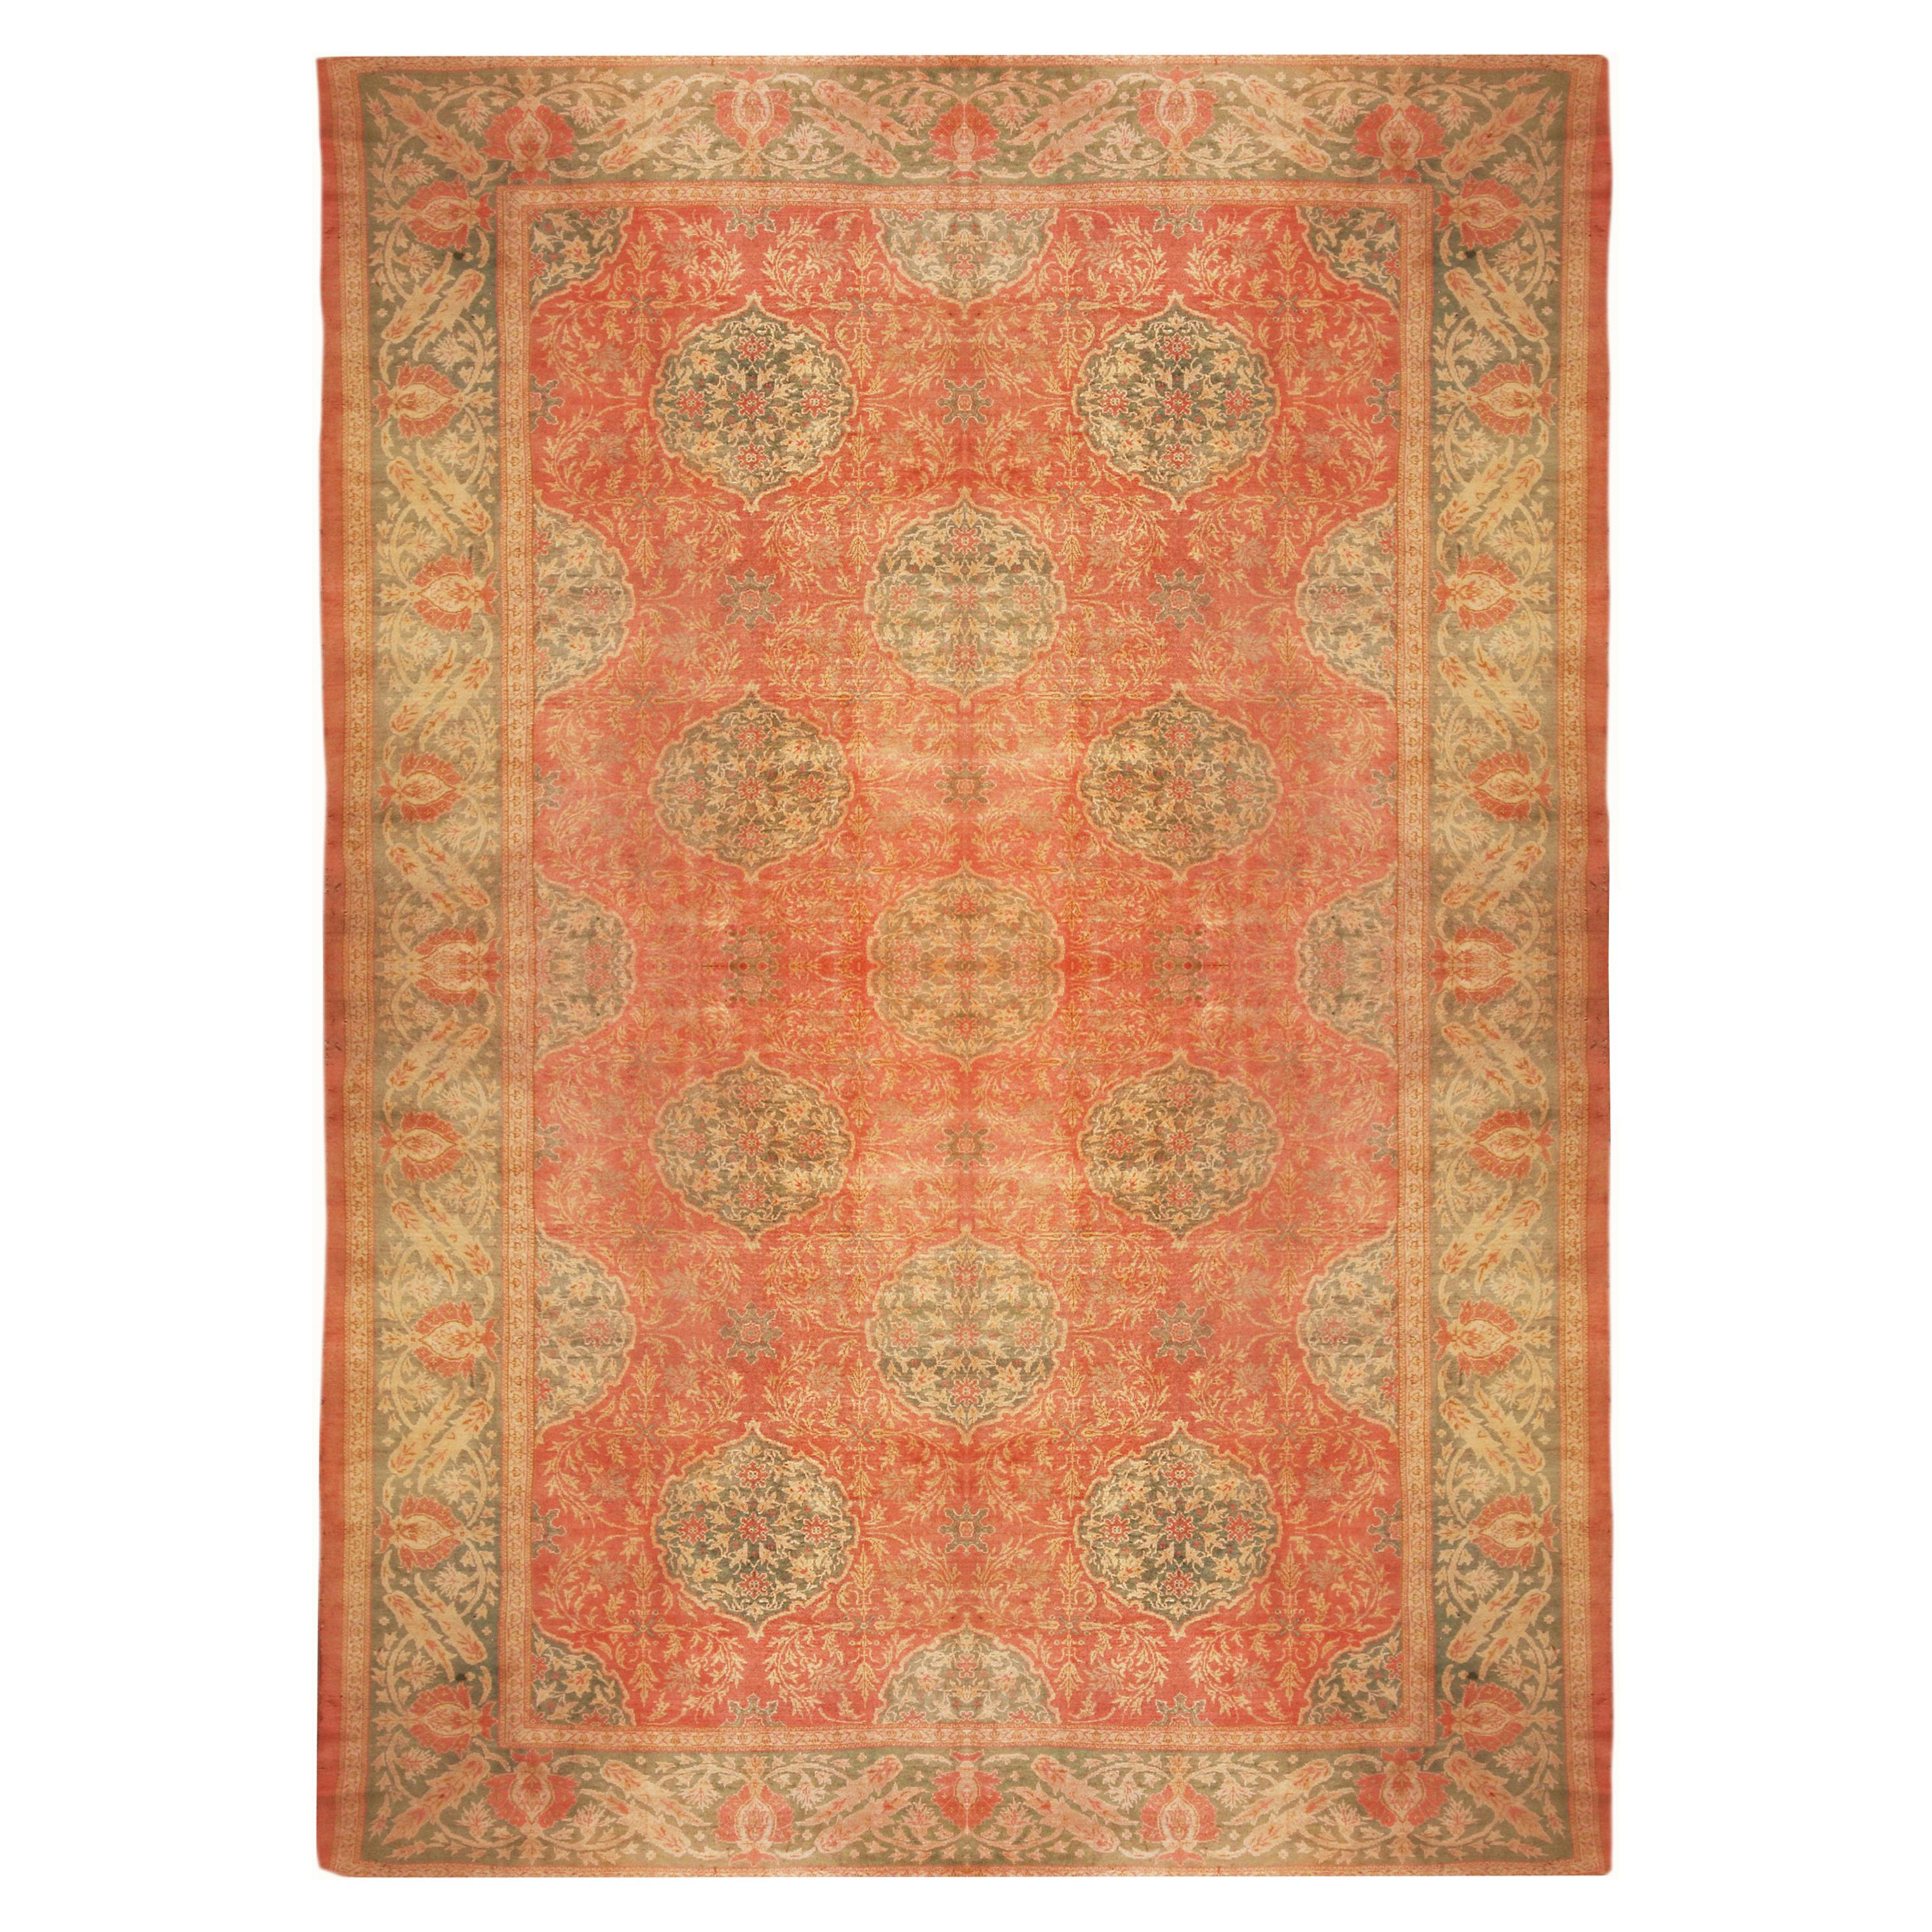 Hand Knotted Antique Oushak Rug in Red and Green Floral Pattern